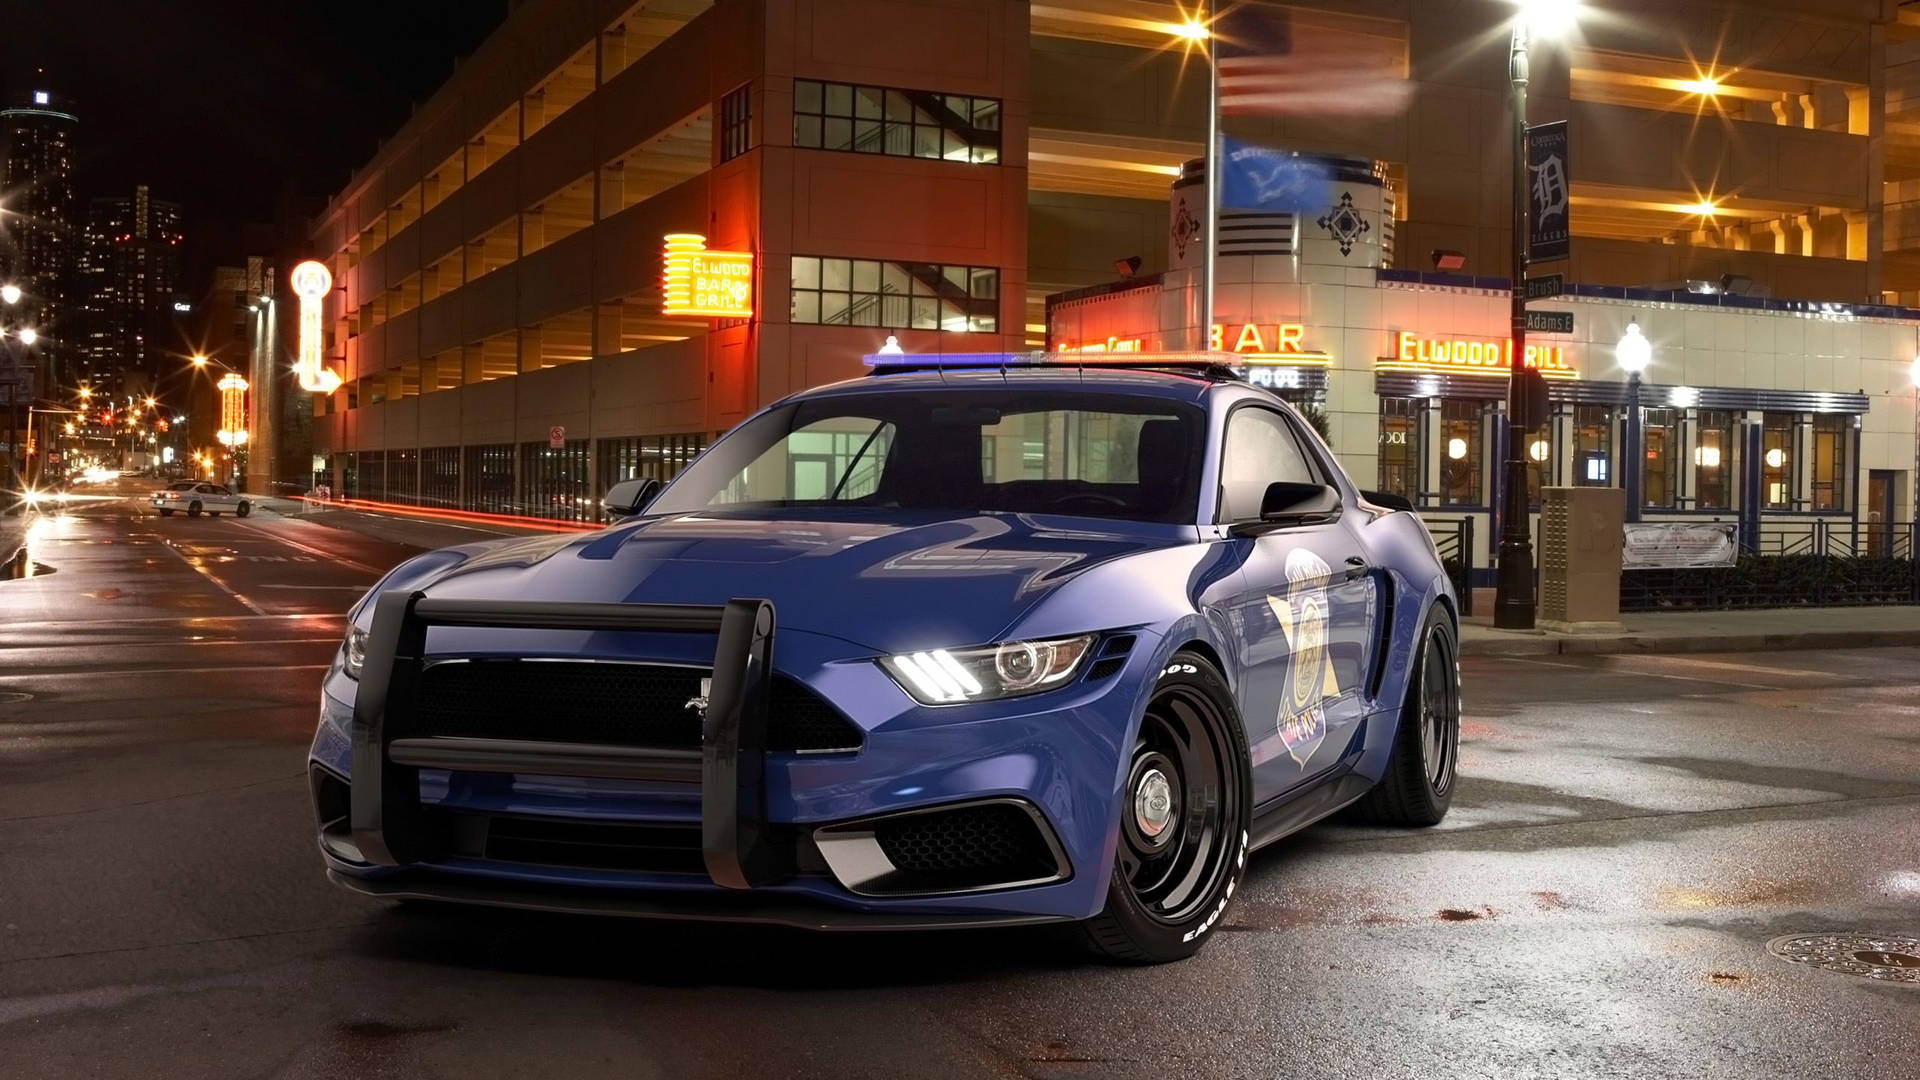 Ford Mustang Police Car Background